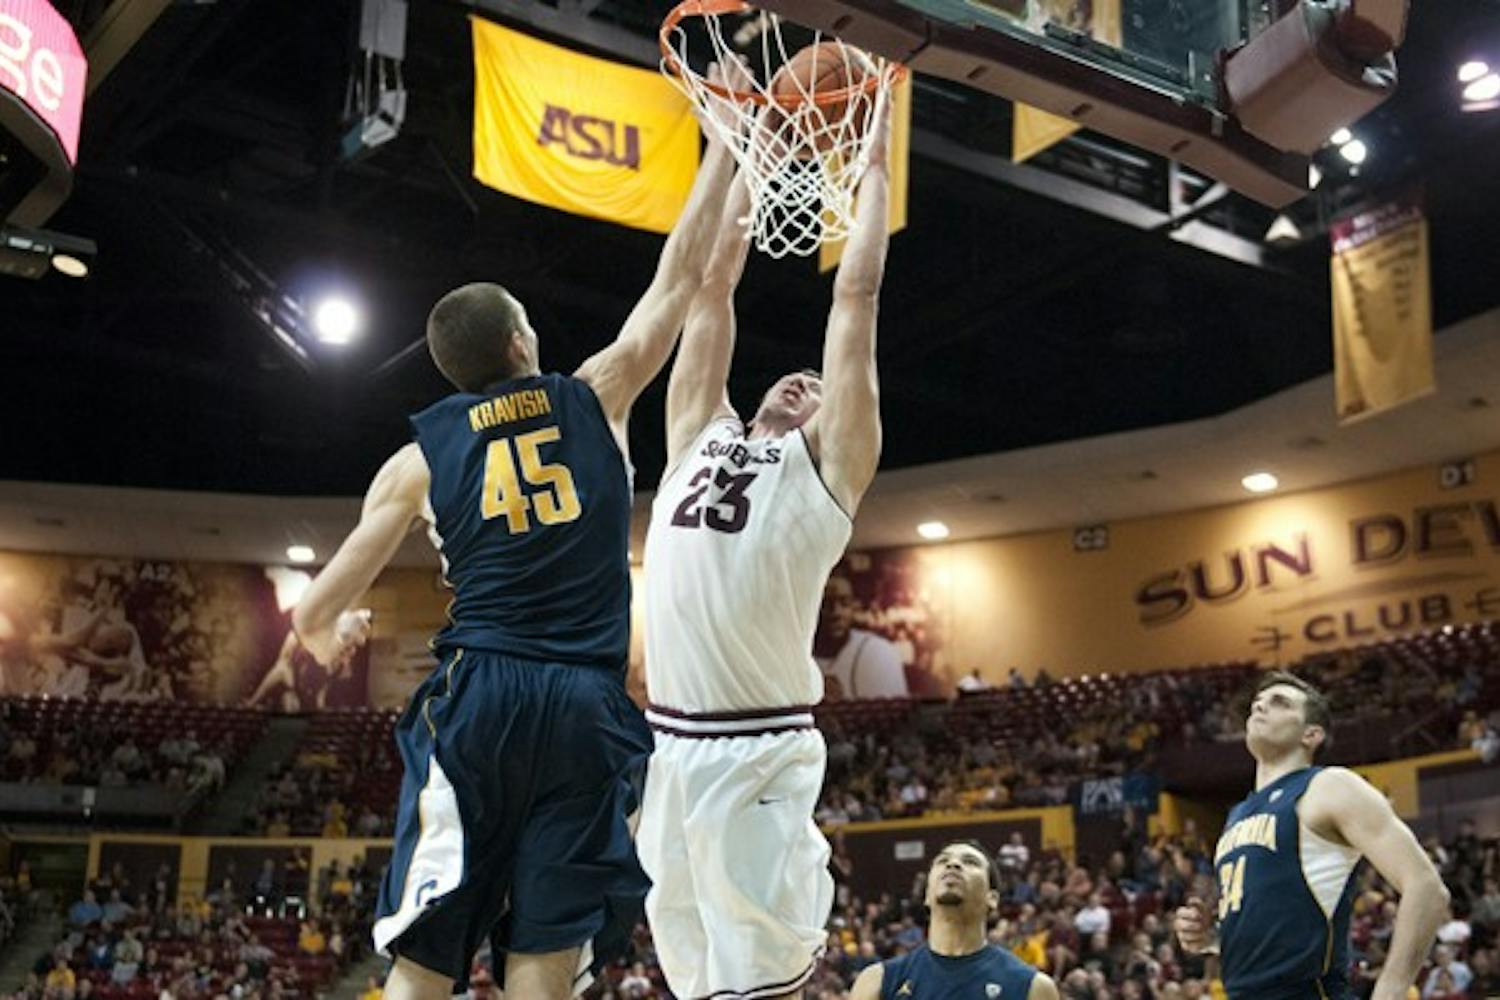 Senior center Ruslan Pateev throws down a dunk against Cal on Feb. 7. Pateev tied his career high with 12 points to help ASU beat Cal. (Photo by Molly J. Smith)